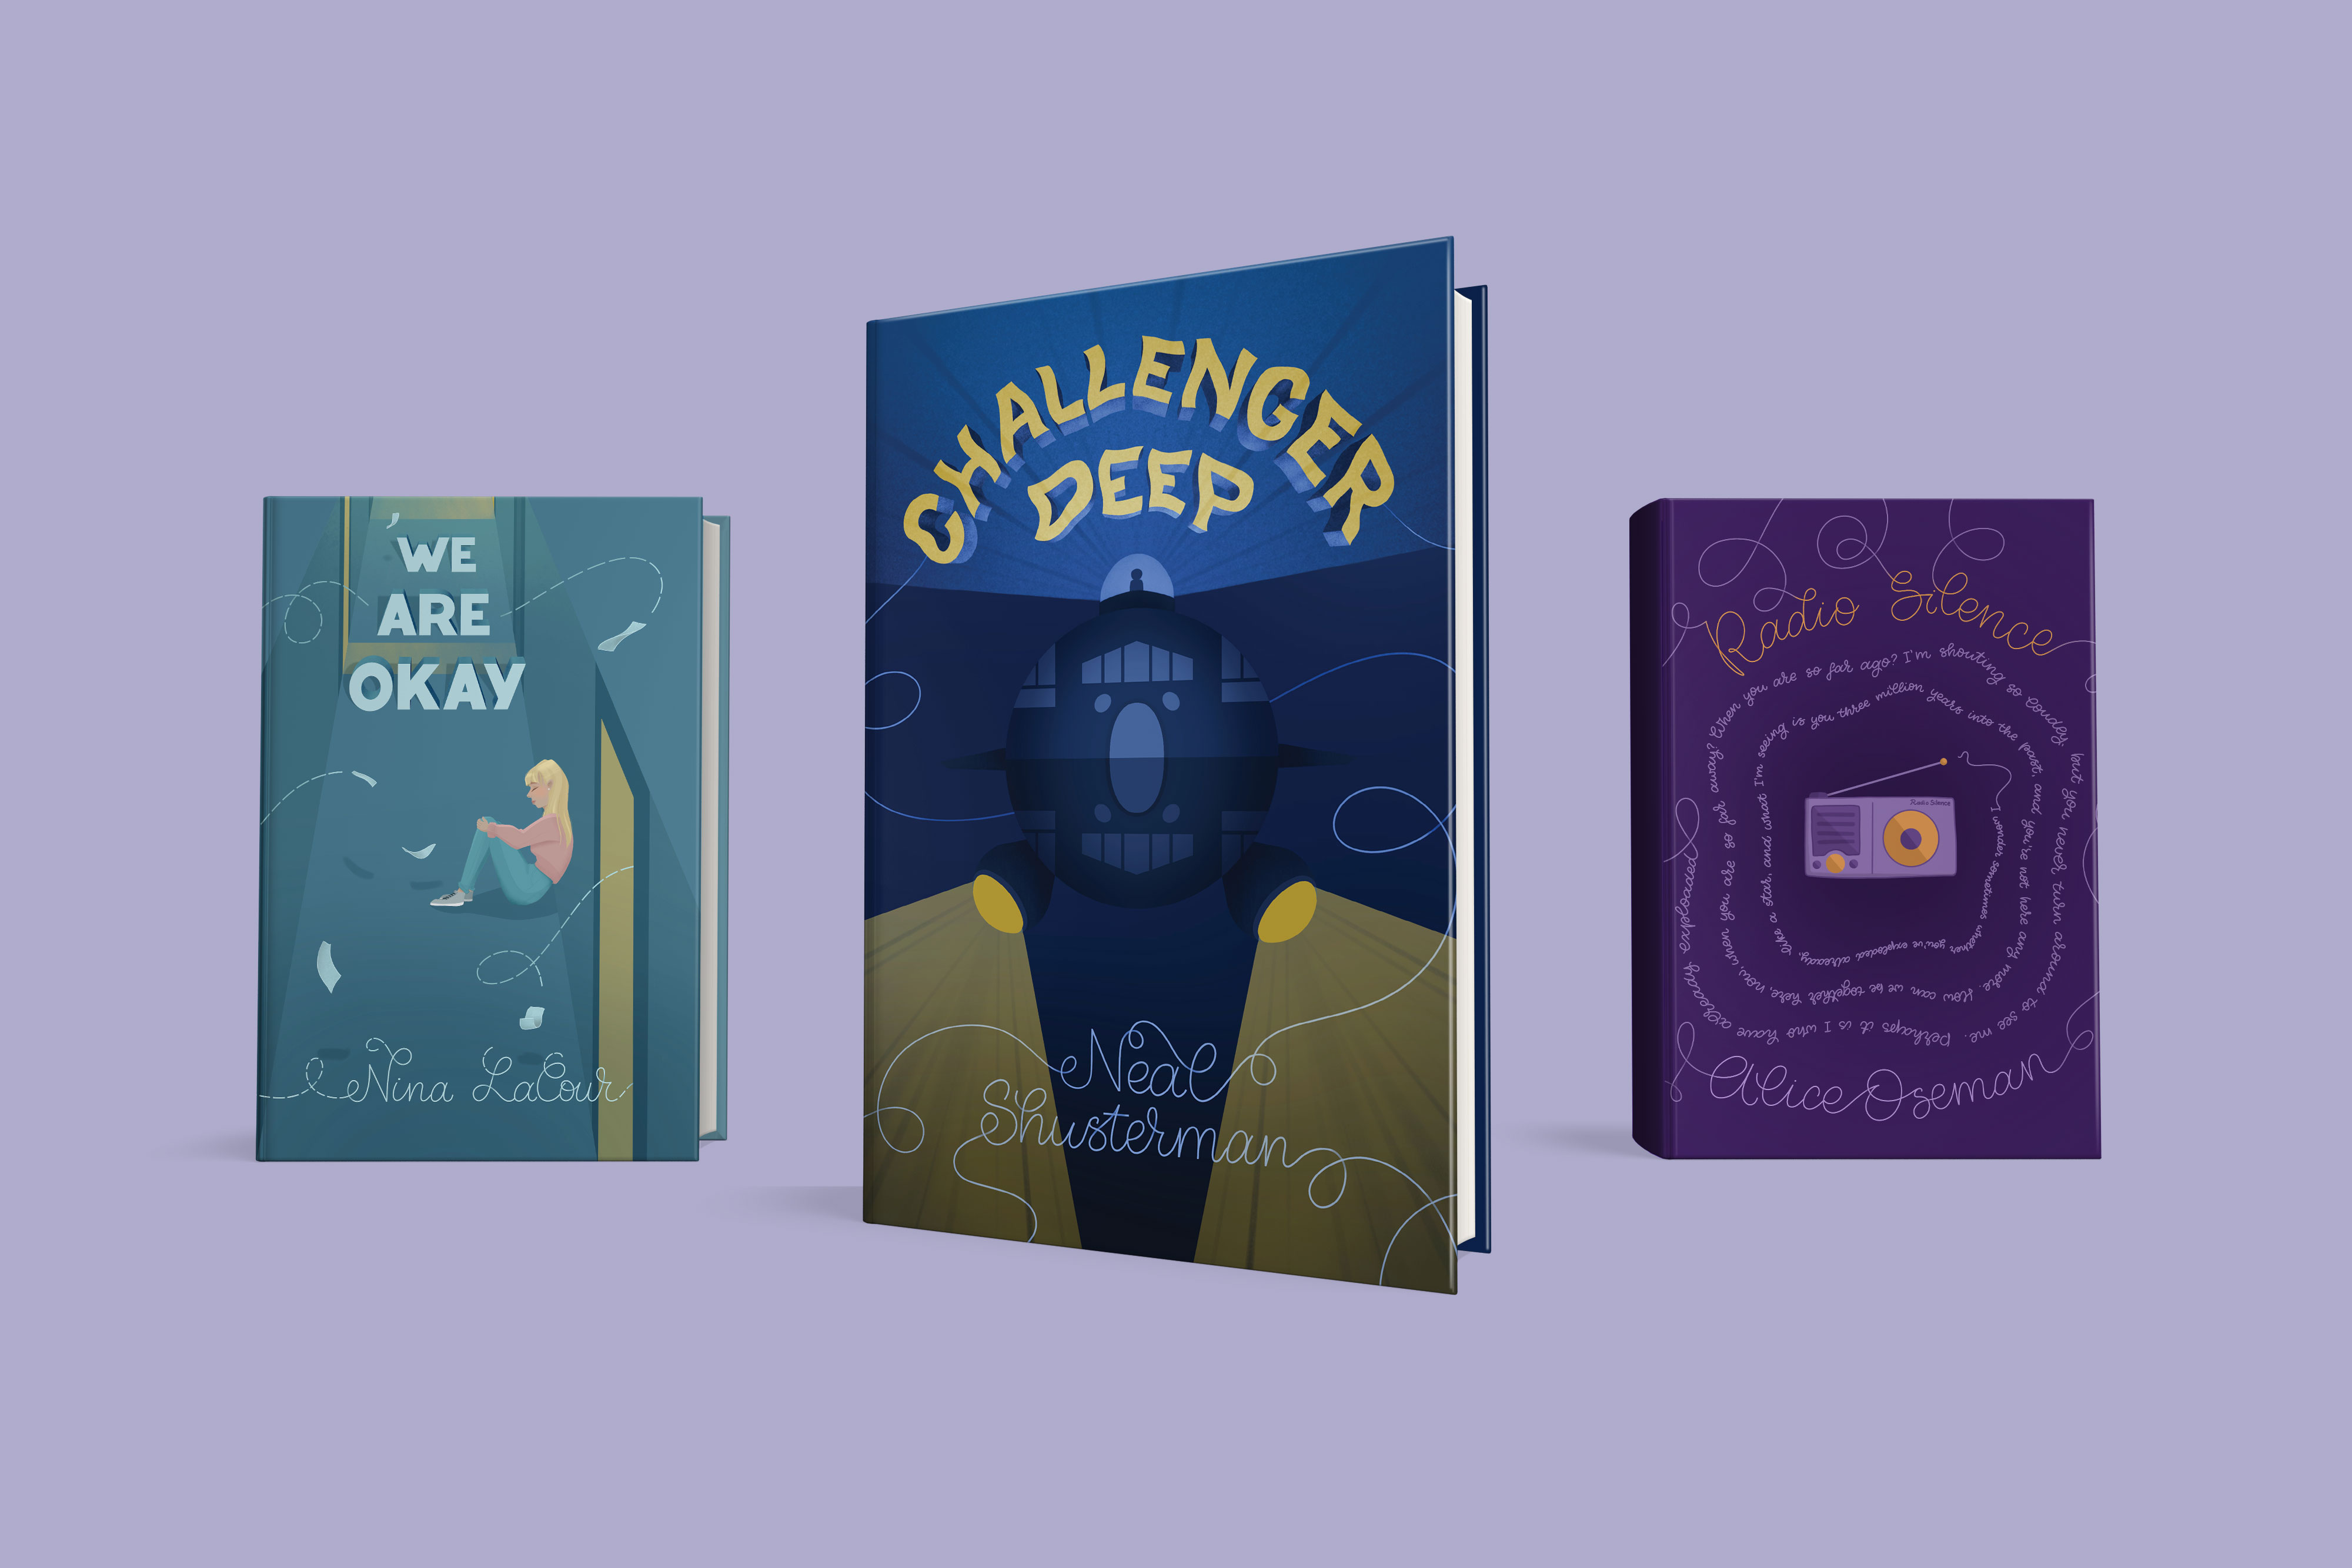 Three books on a lilac background. The book in the middle is Challenger deep, with a navy background and a submarine in the center. The book to the left is We Are Okay and is a teal cover with a person sitting alone in a hallway. The cover to the right is purple with a radio at the center and words coming out as if a radio signal.